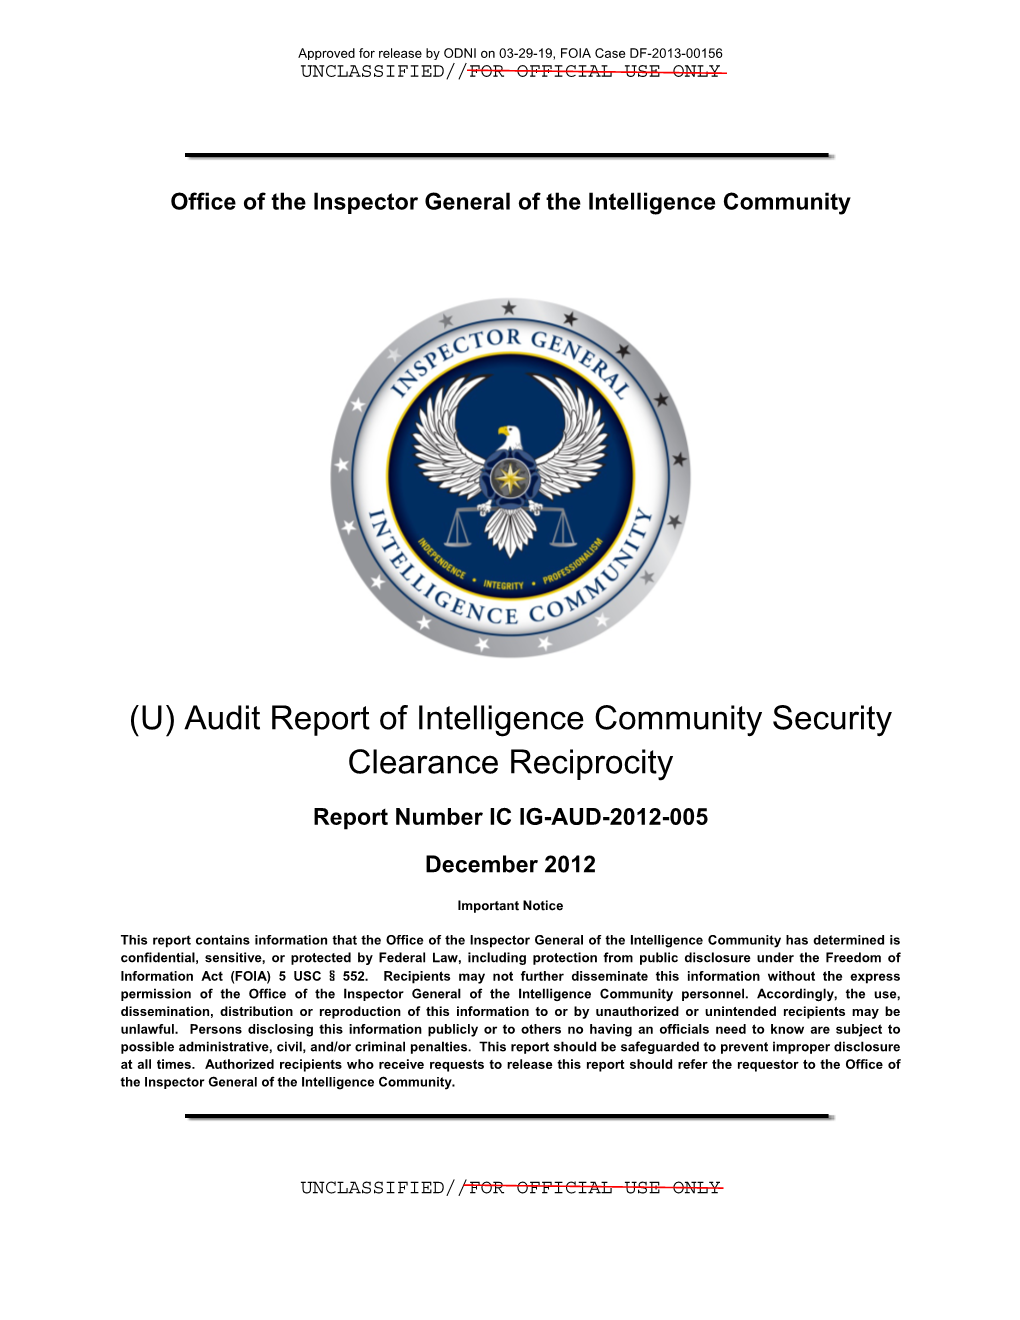 (U) Audit Report of Intelligence Community Security Clearance Reciprocity